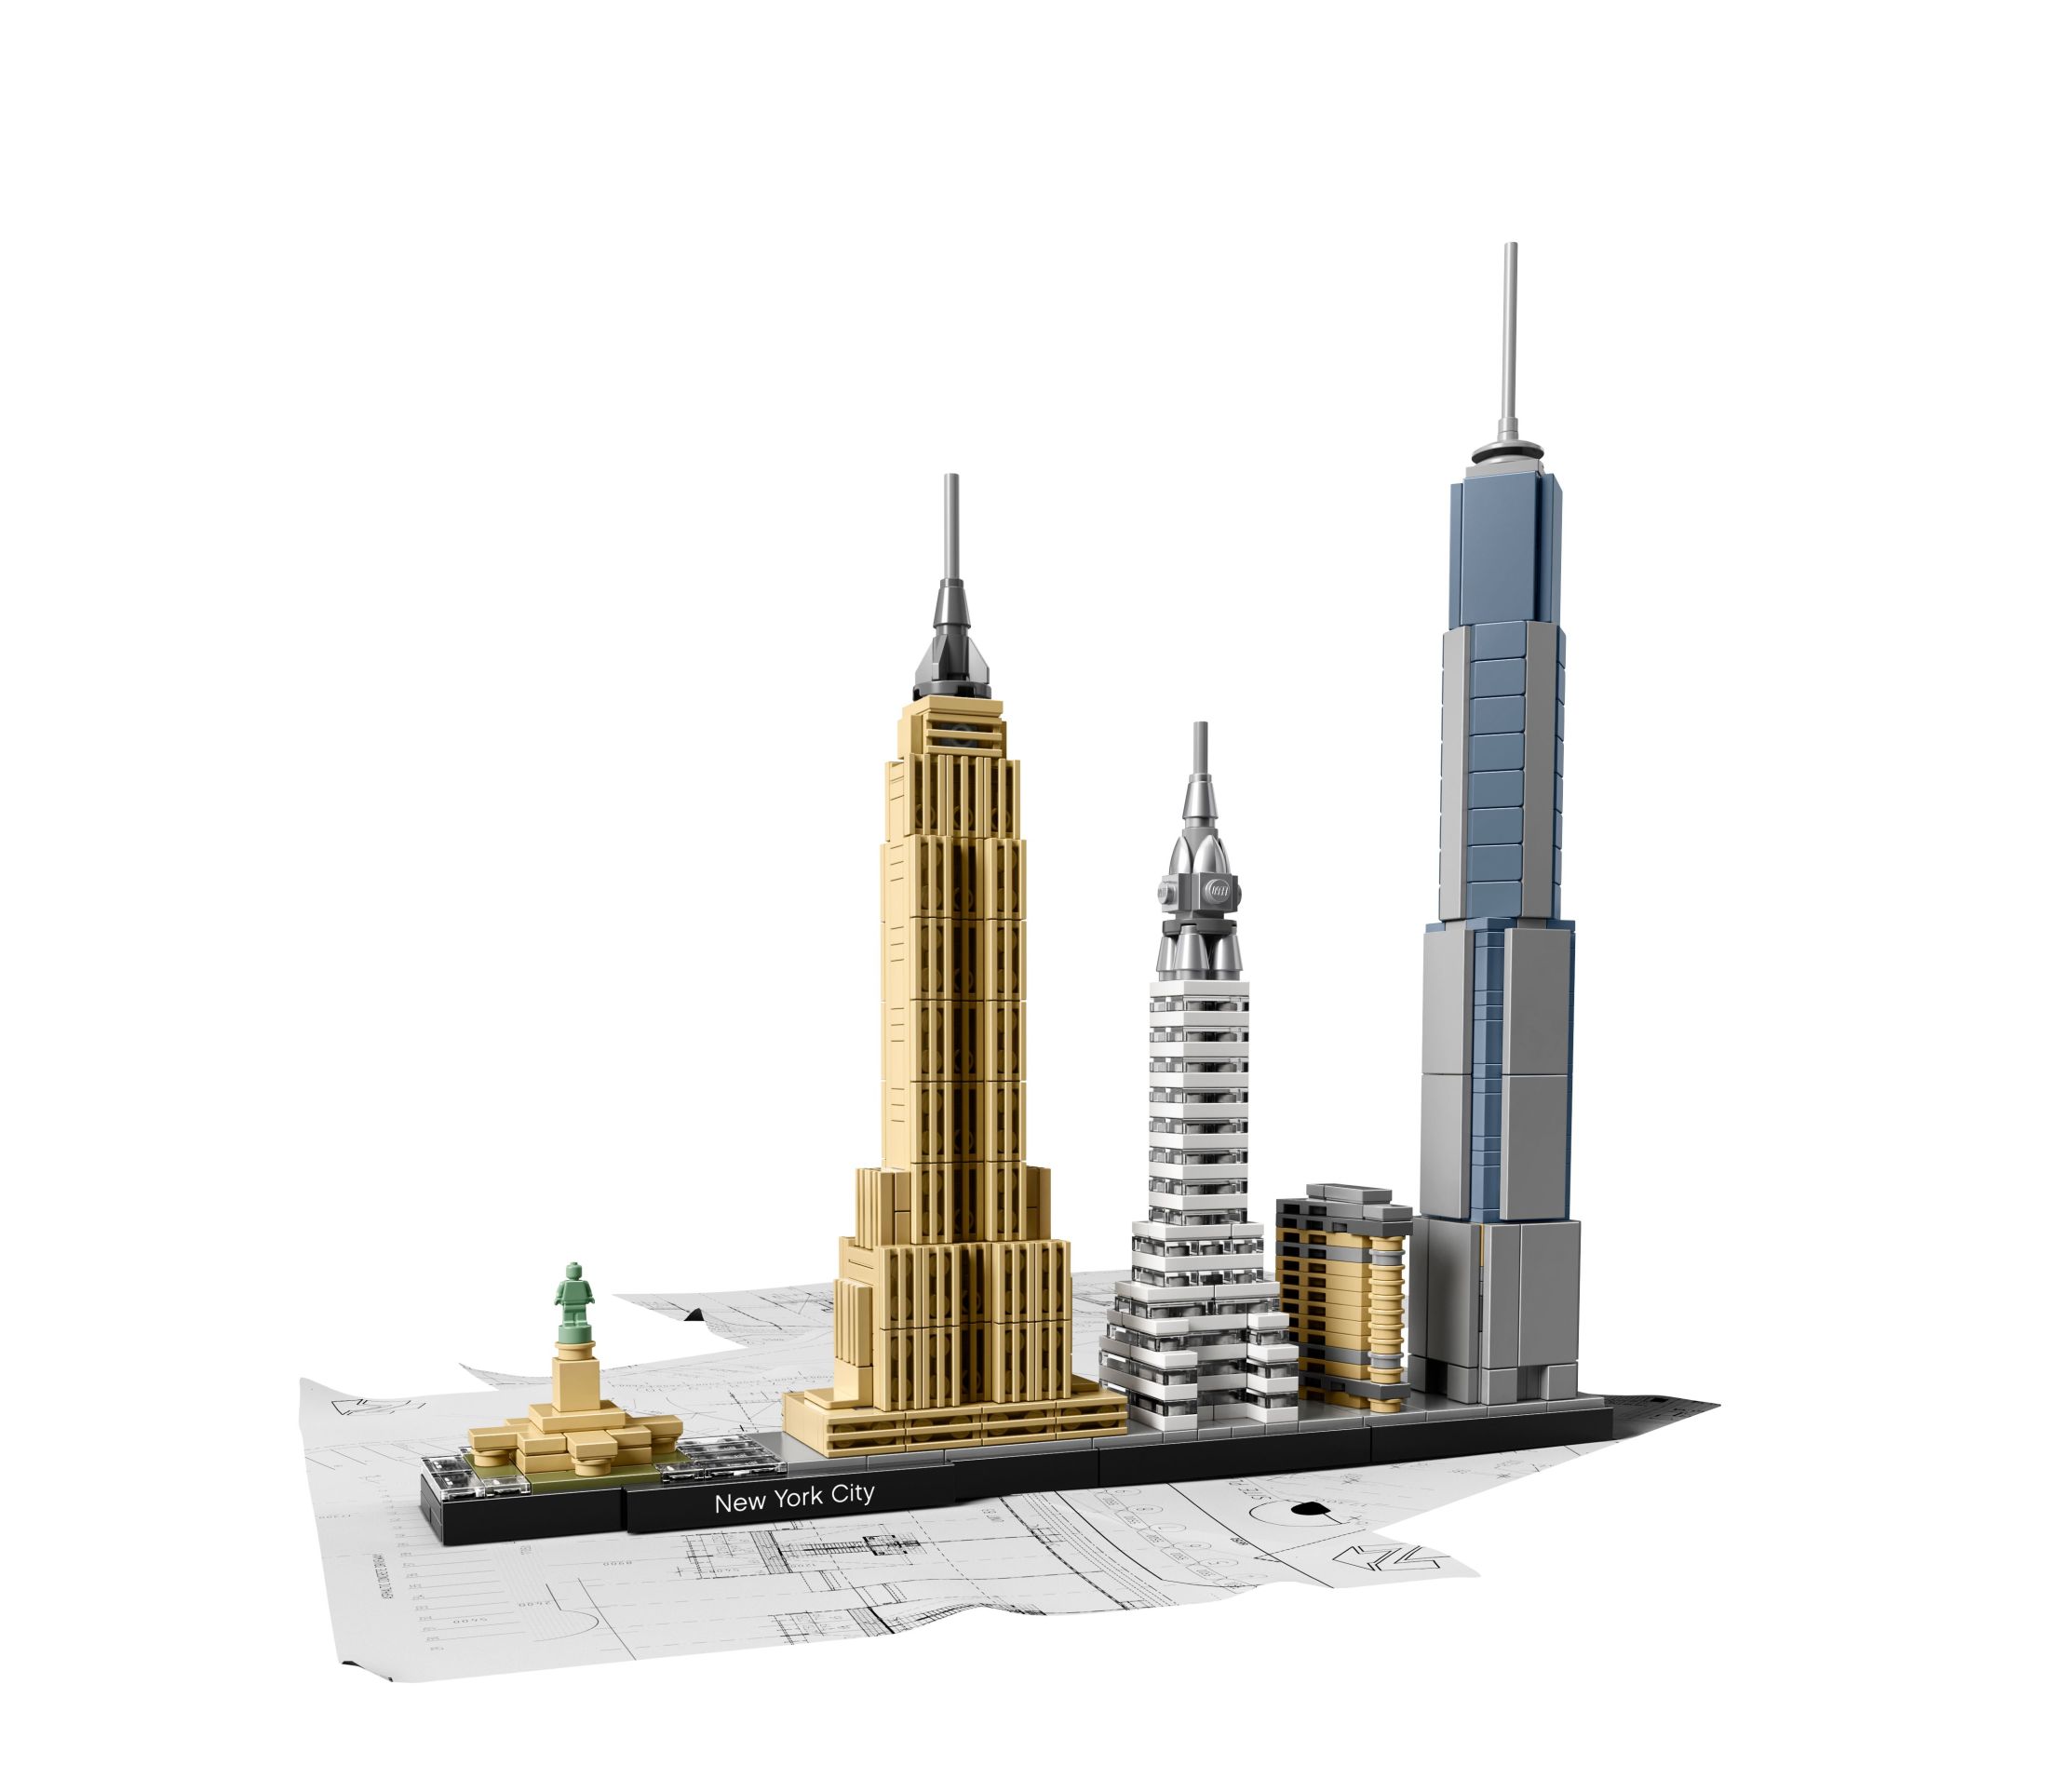 LEGO Architecture New York City Skyline 21028, Collectible Model Kit for Adults to Build, Creative Activity, Home Décor Gift Idea - image 3 of 5